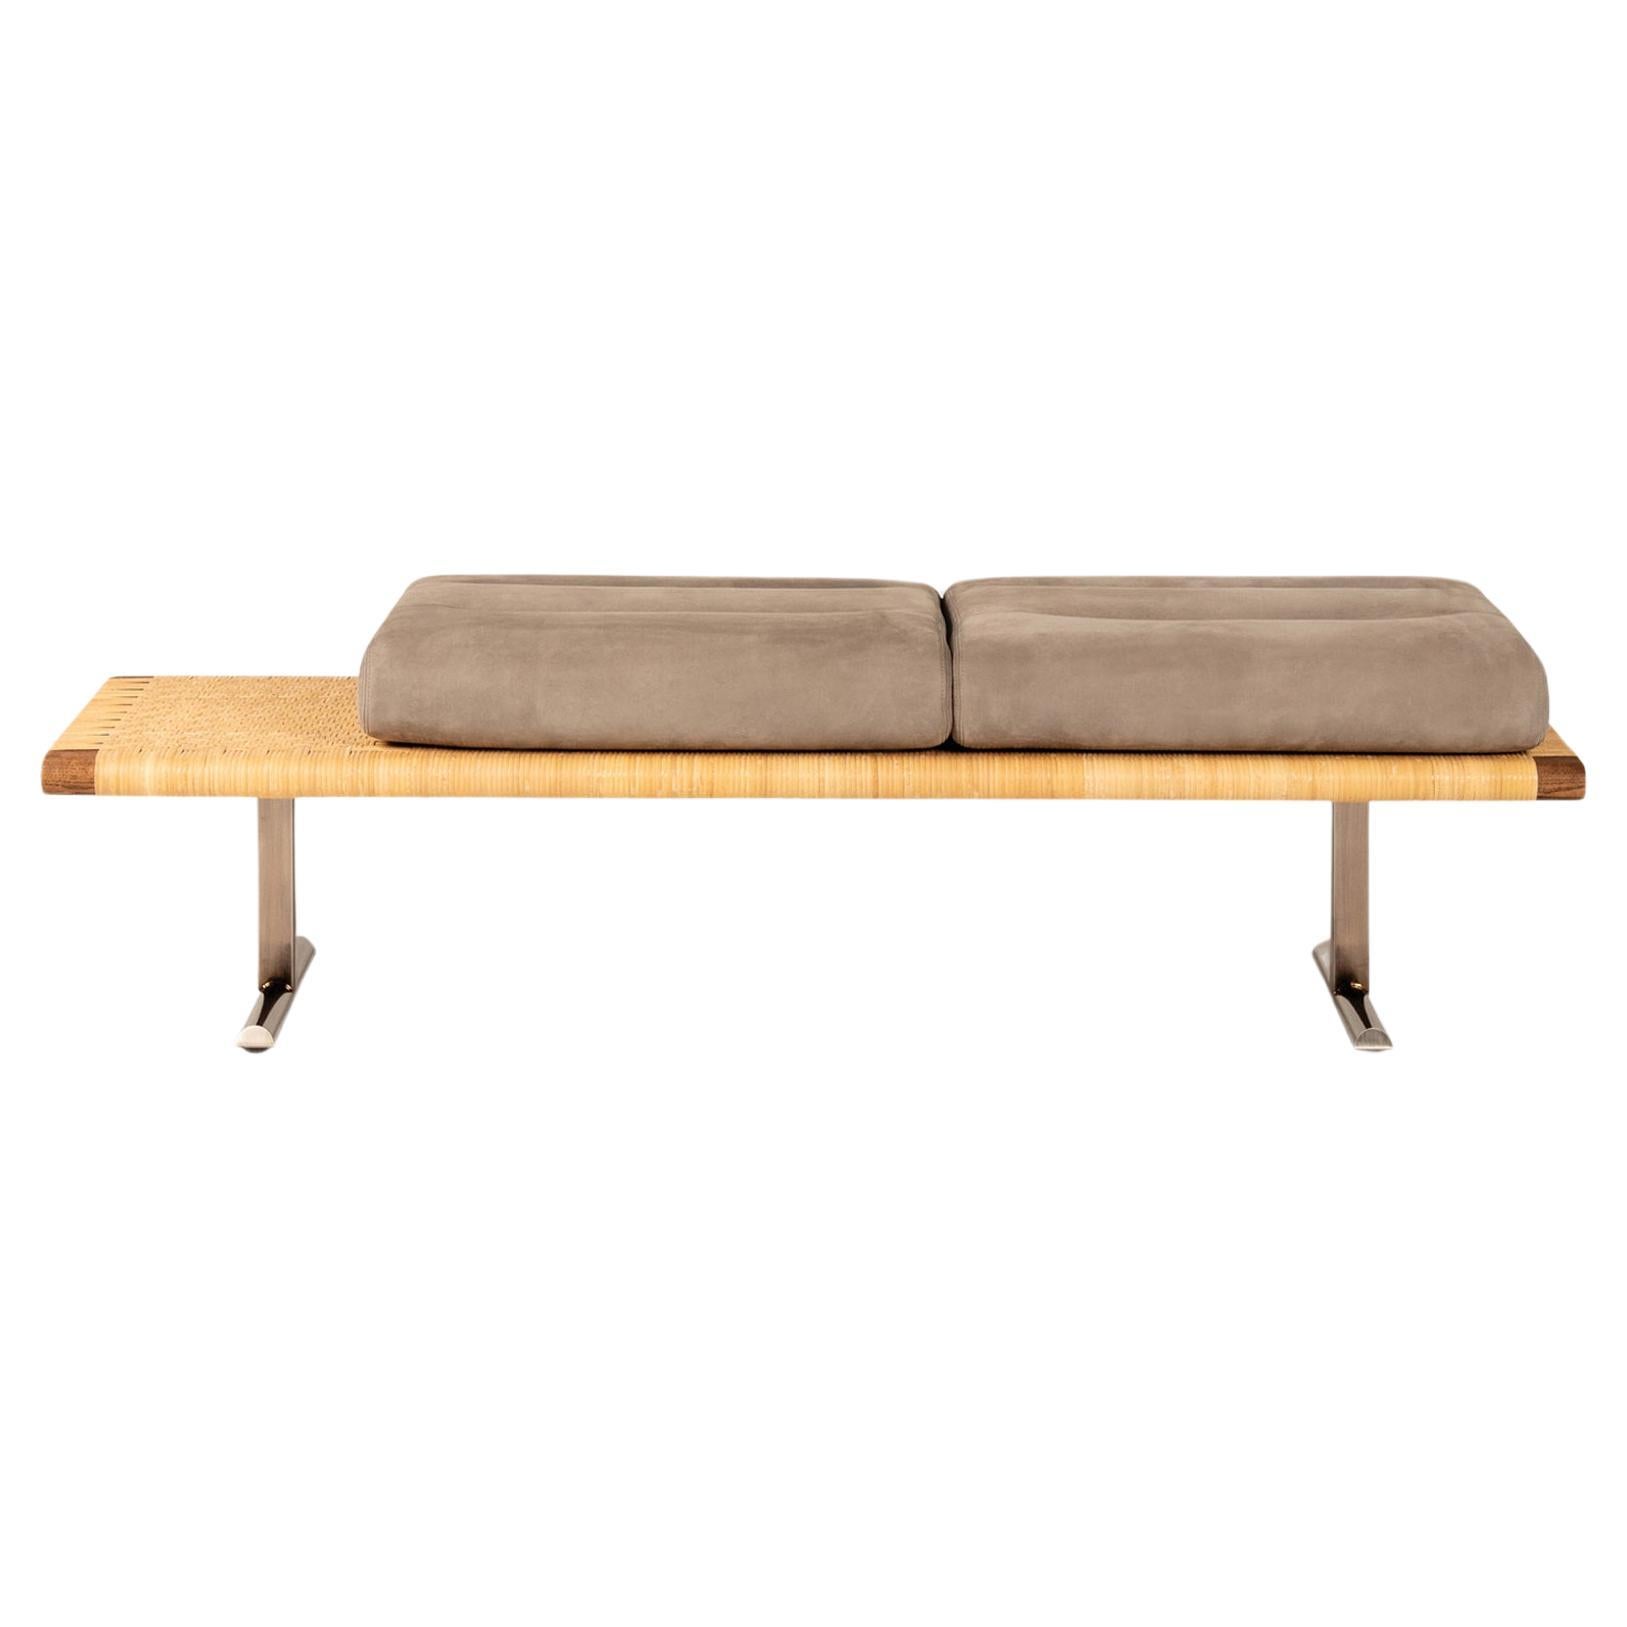 El Raval Walnut Stained Natural Rattan Bench by Yabu Pushelberg For Sale